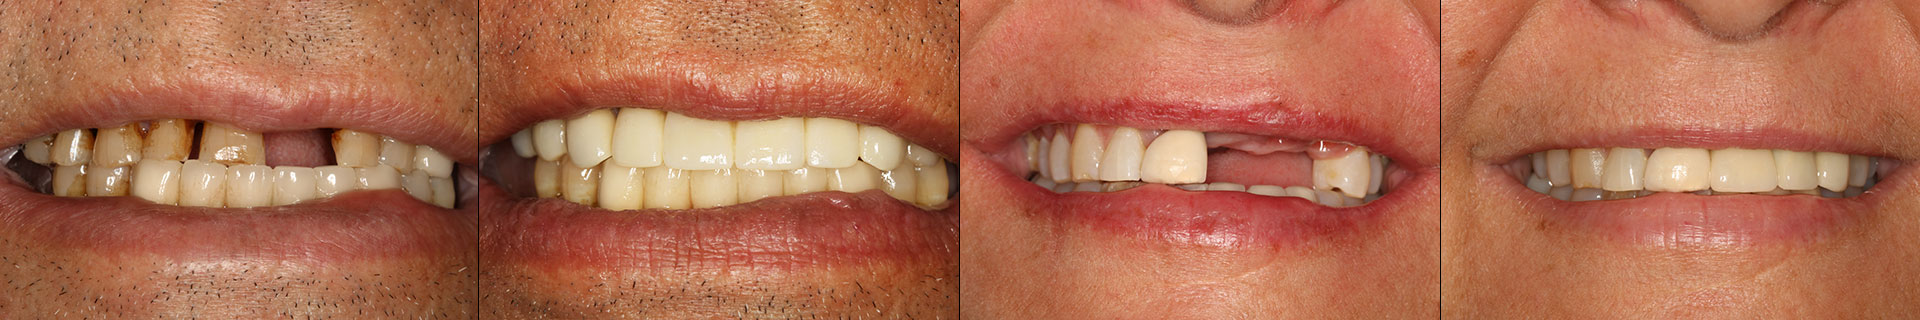 Before and After - Full Mouth Dental Implants in Pembroke Pines, FL